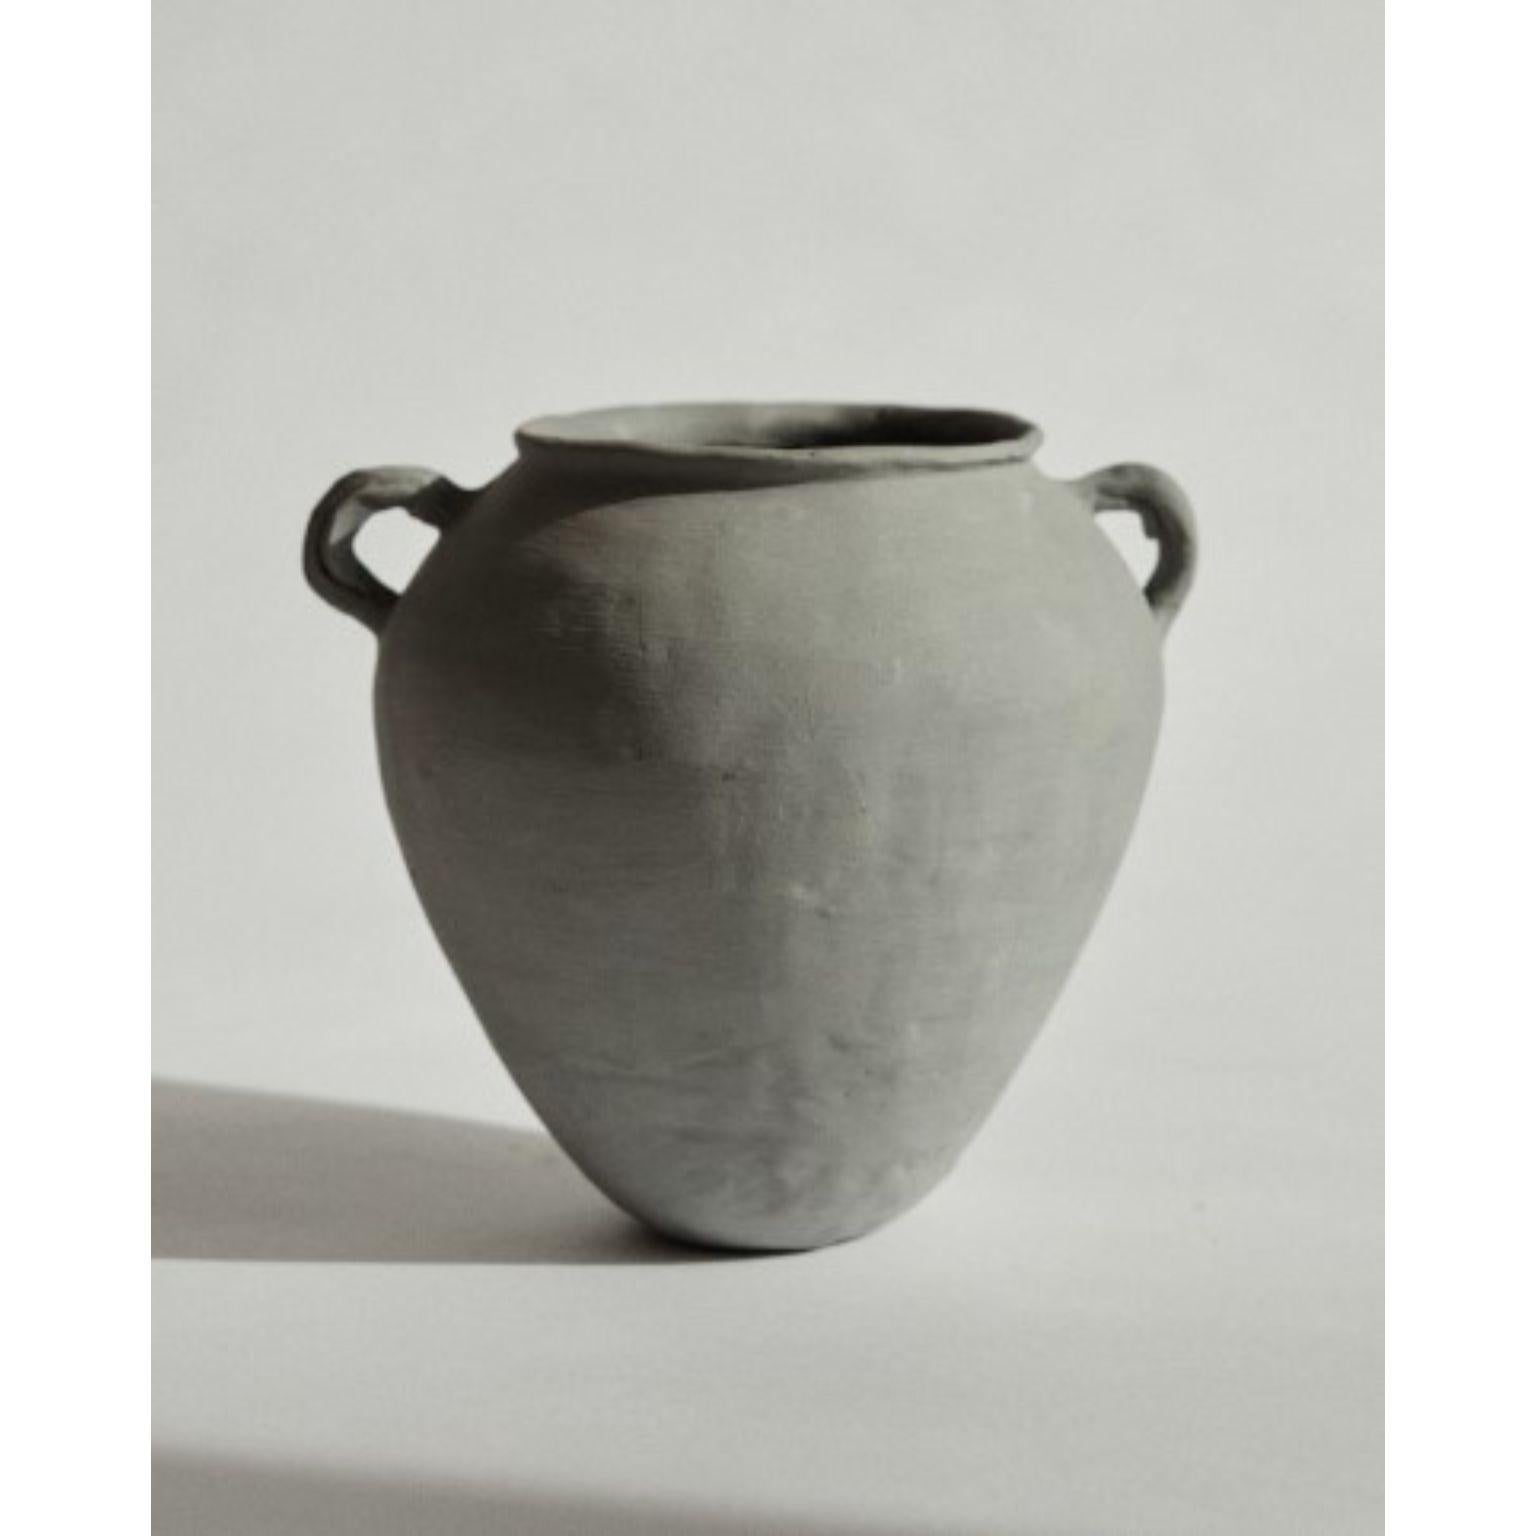 Grey vase by Marta Bonilla
Dimensions: D22 x H21 cm
Materials: Terracotta , clay.

Grey vase: Piece modeled by hand, enameled inside and painted in a soft gray color on the outside.
Handles very handmade aspect.

Marta Bonilla designs and